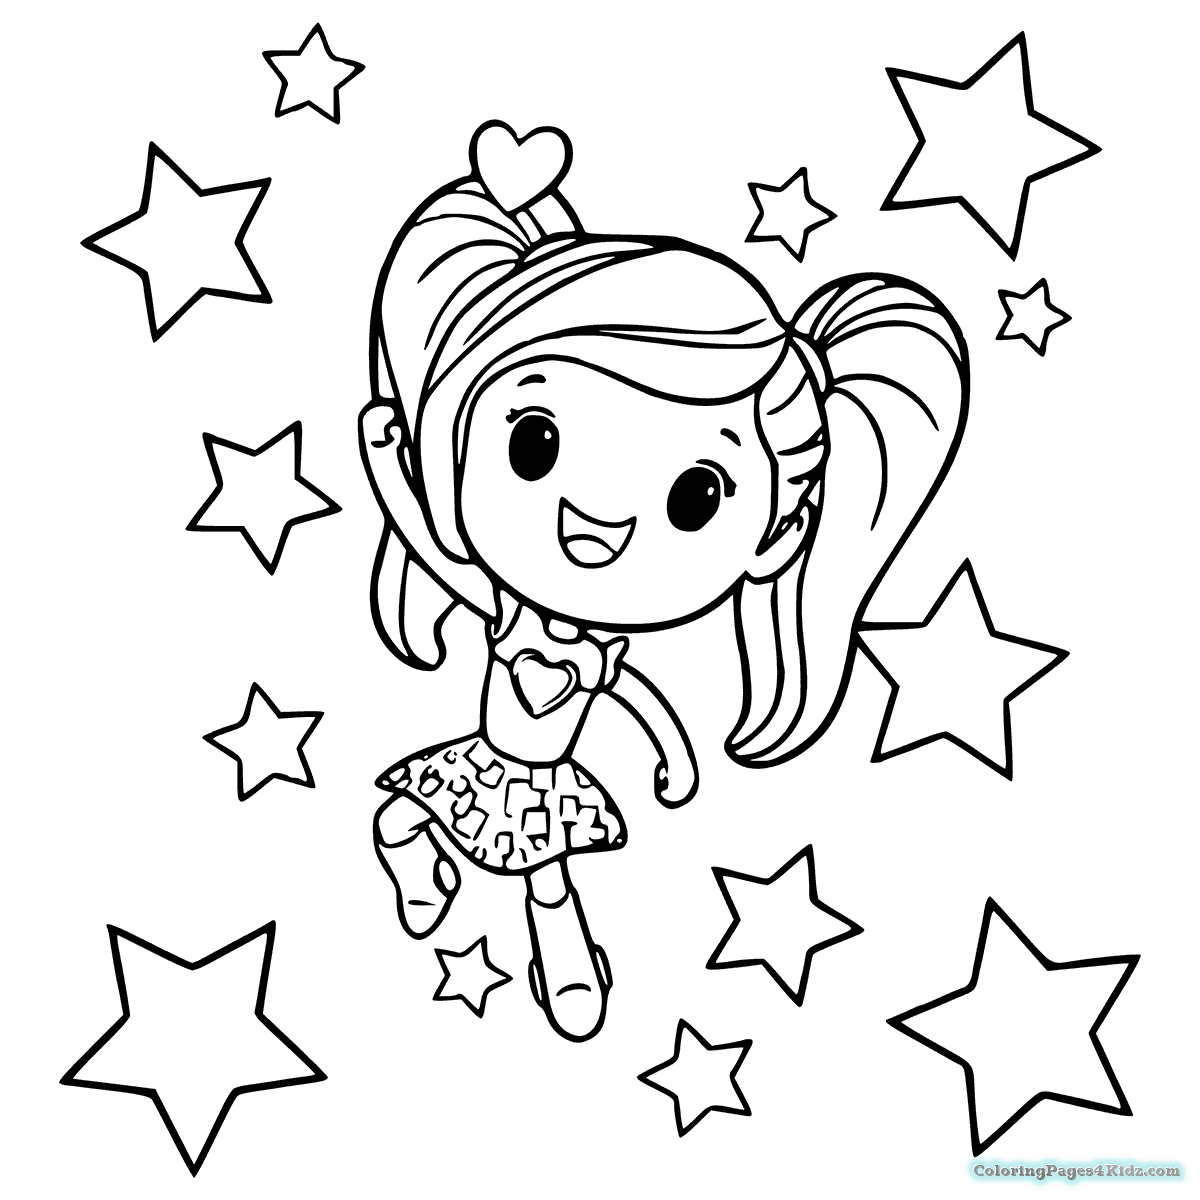 Barbie Head Coloring Pages at GetColorings.com | Free printable